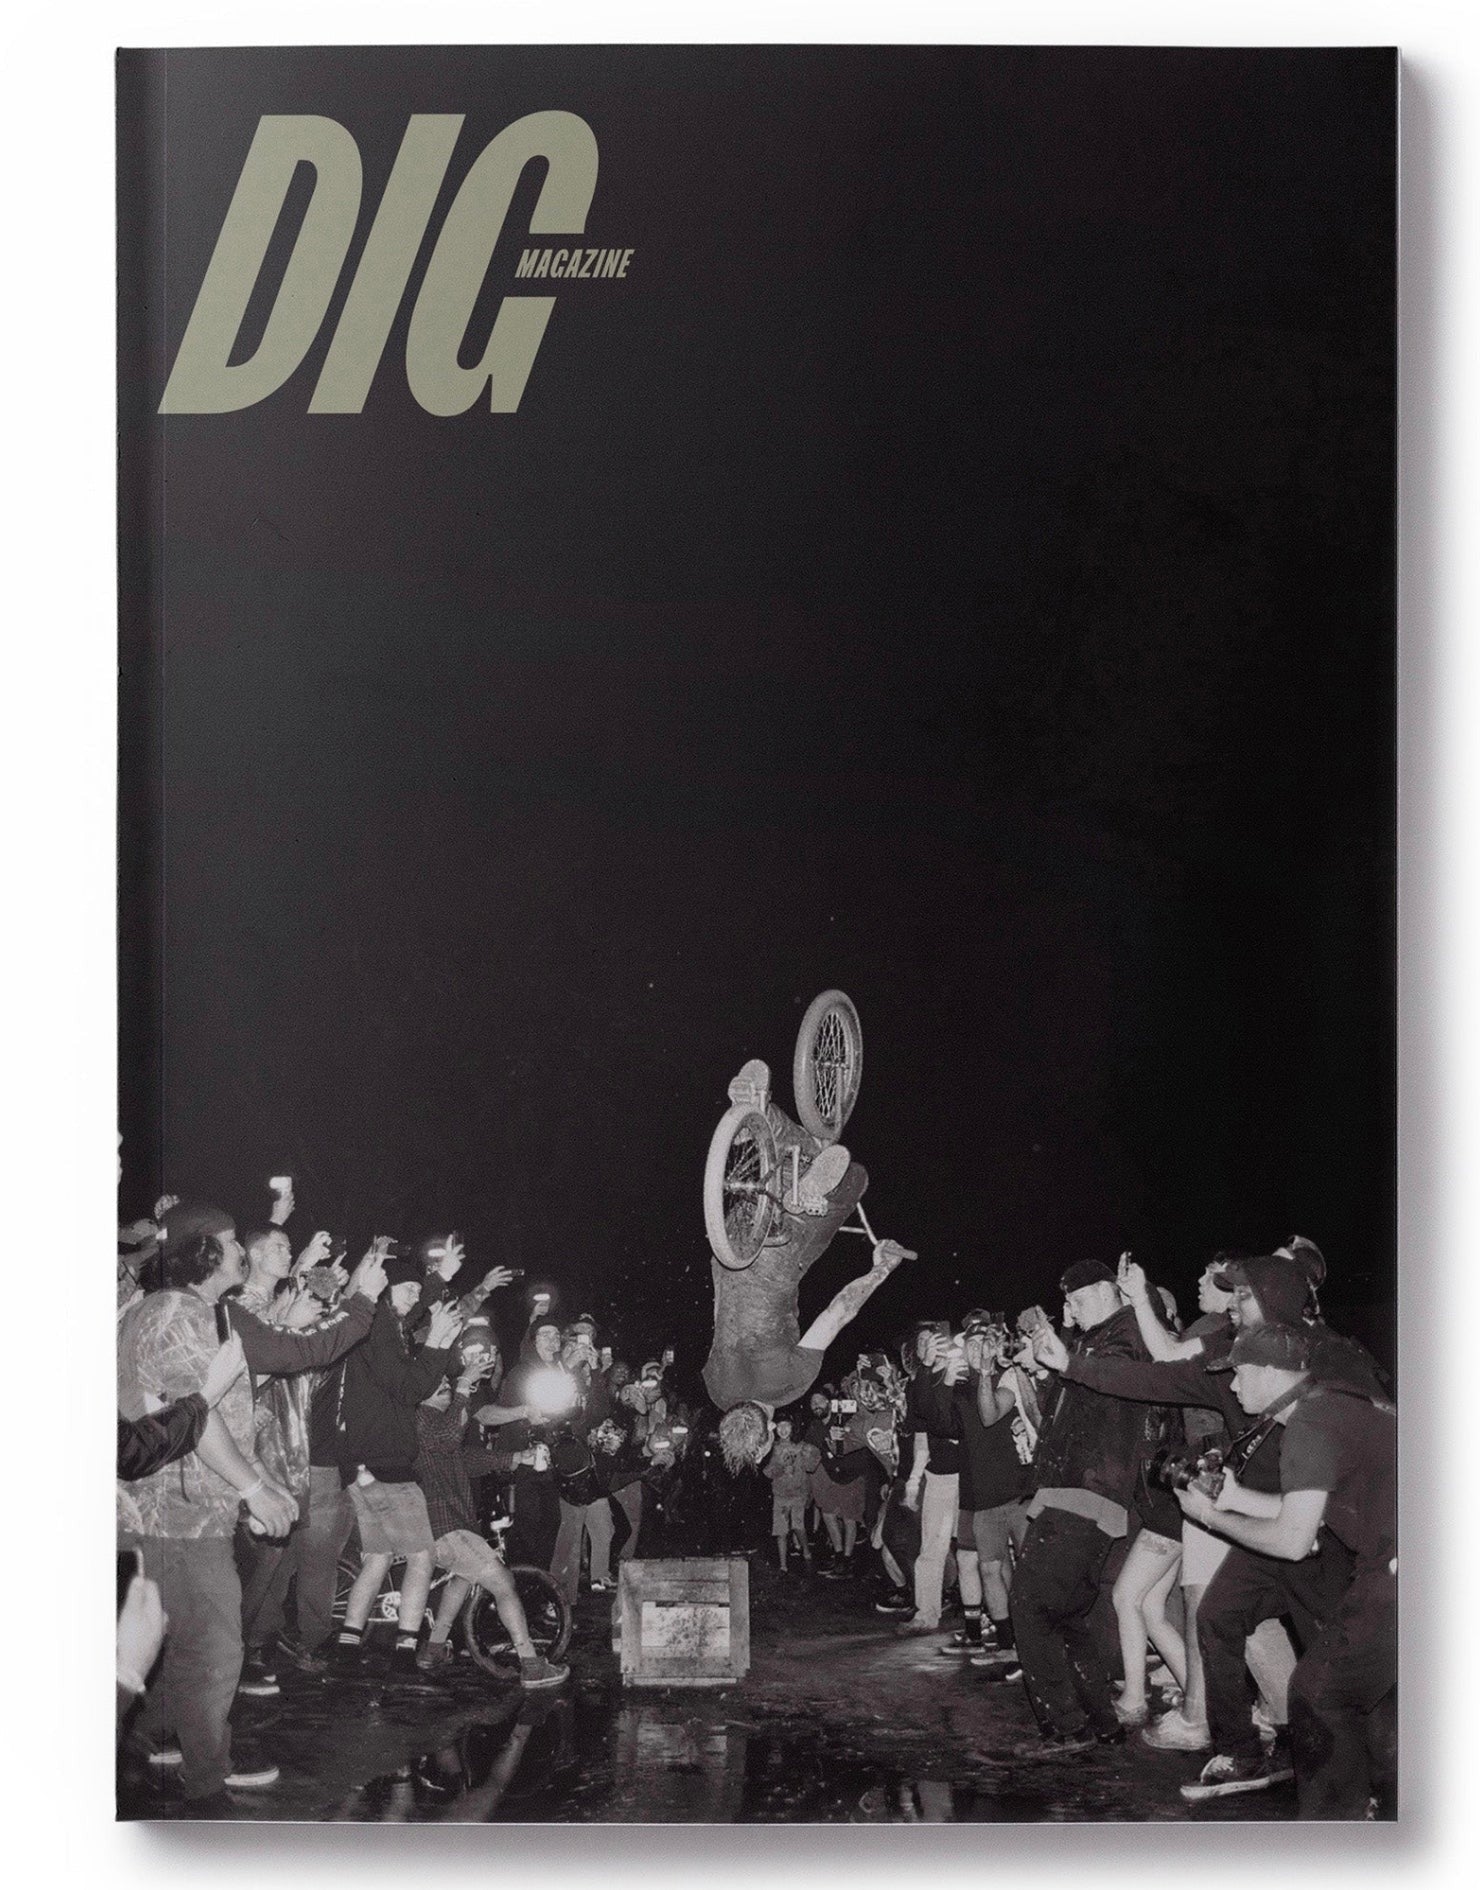 The cover of DIG Book 2021 - Photo Annual featuring a man riding a bike at Swampfest, issue #2021.